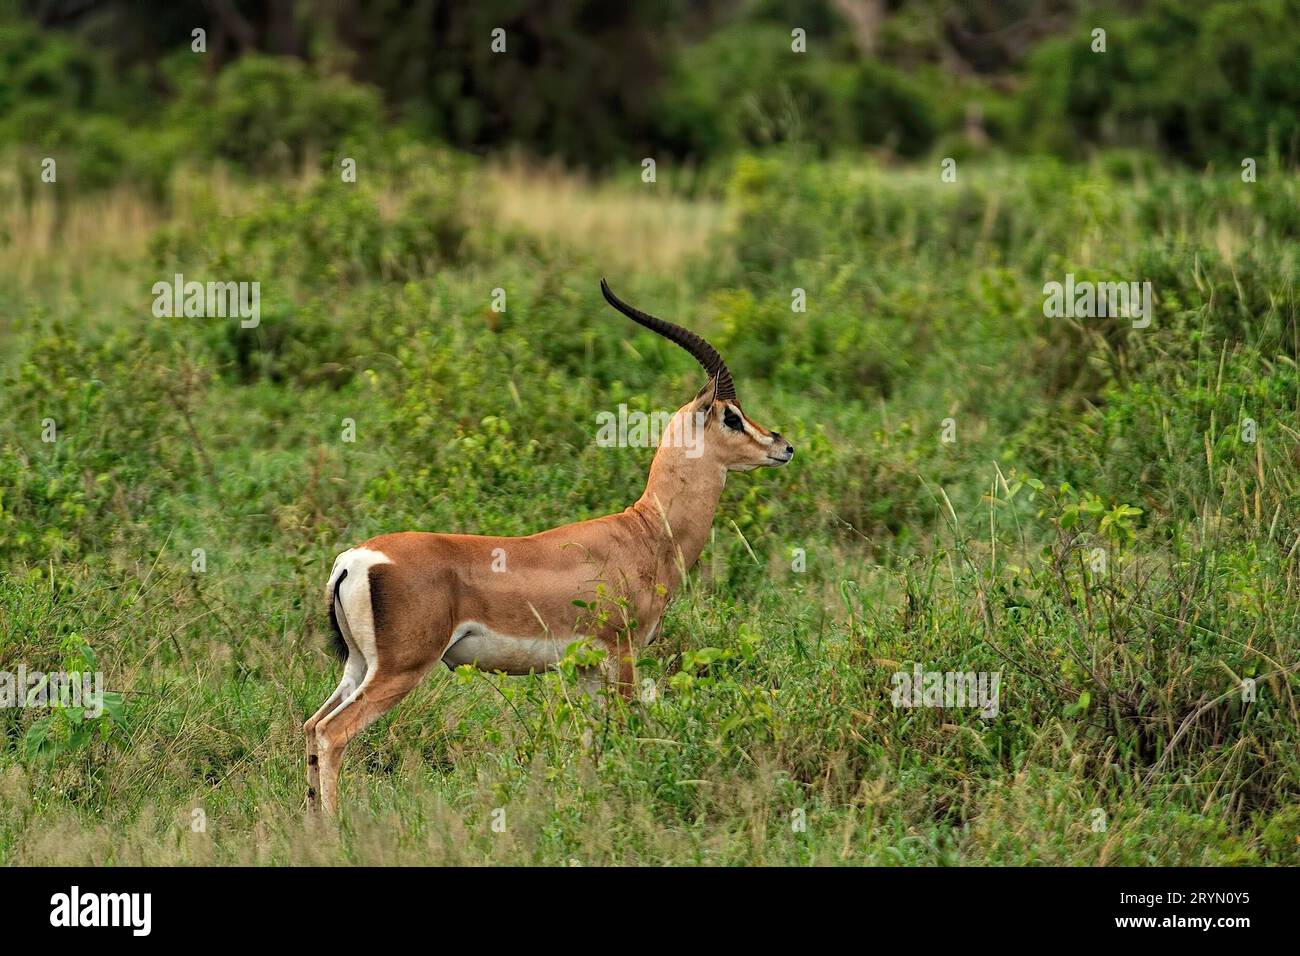 A picture of a gazelle Stock Photo